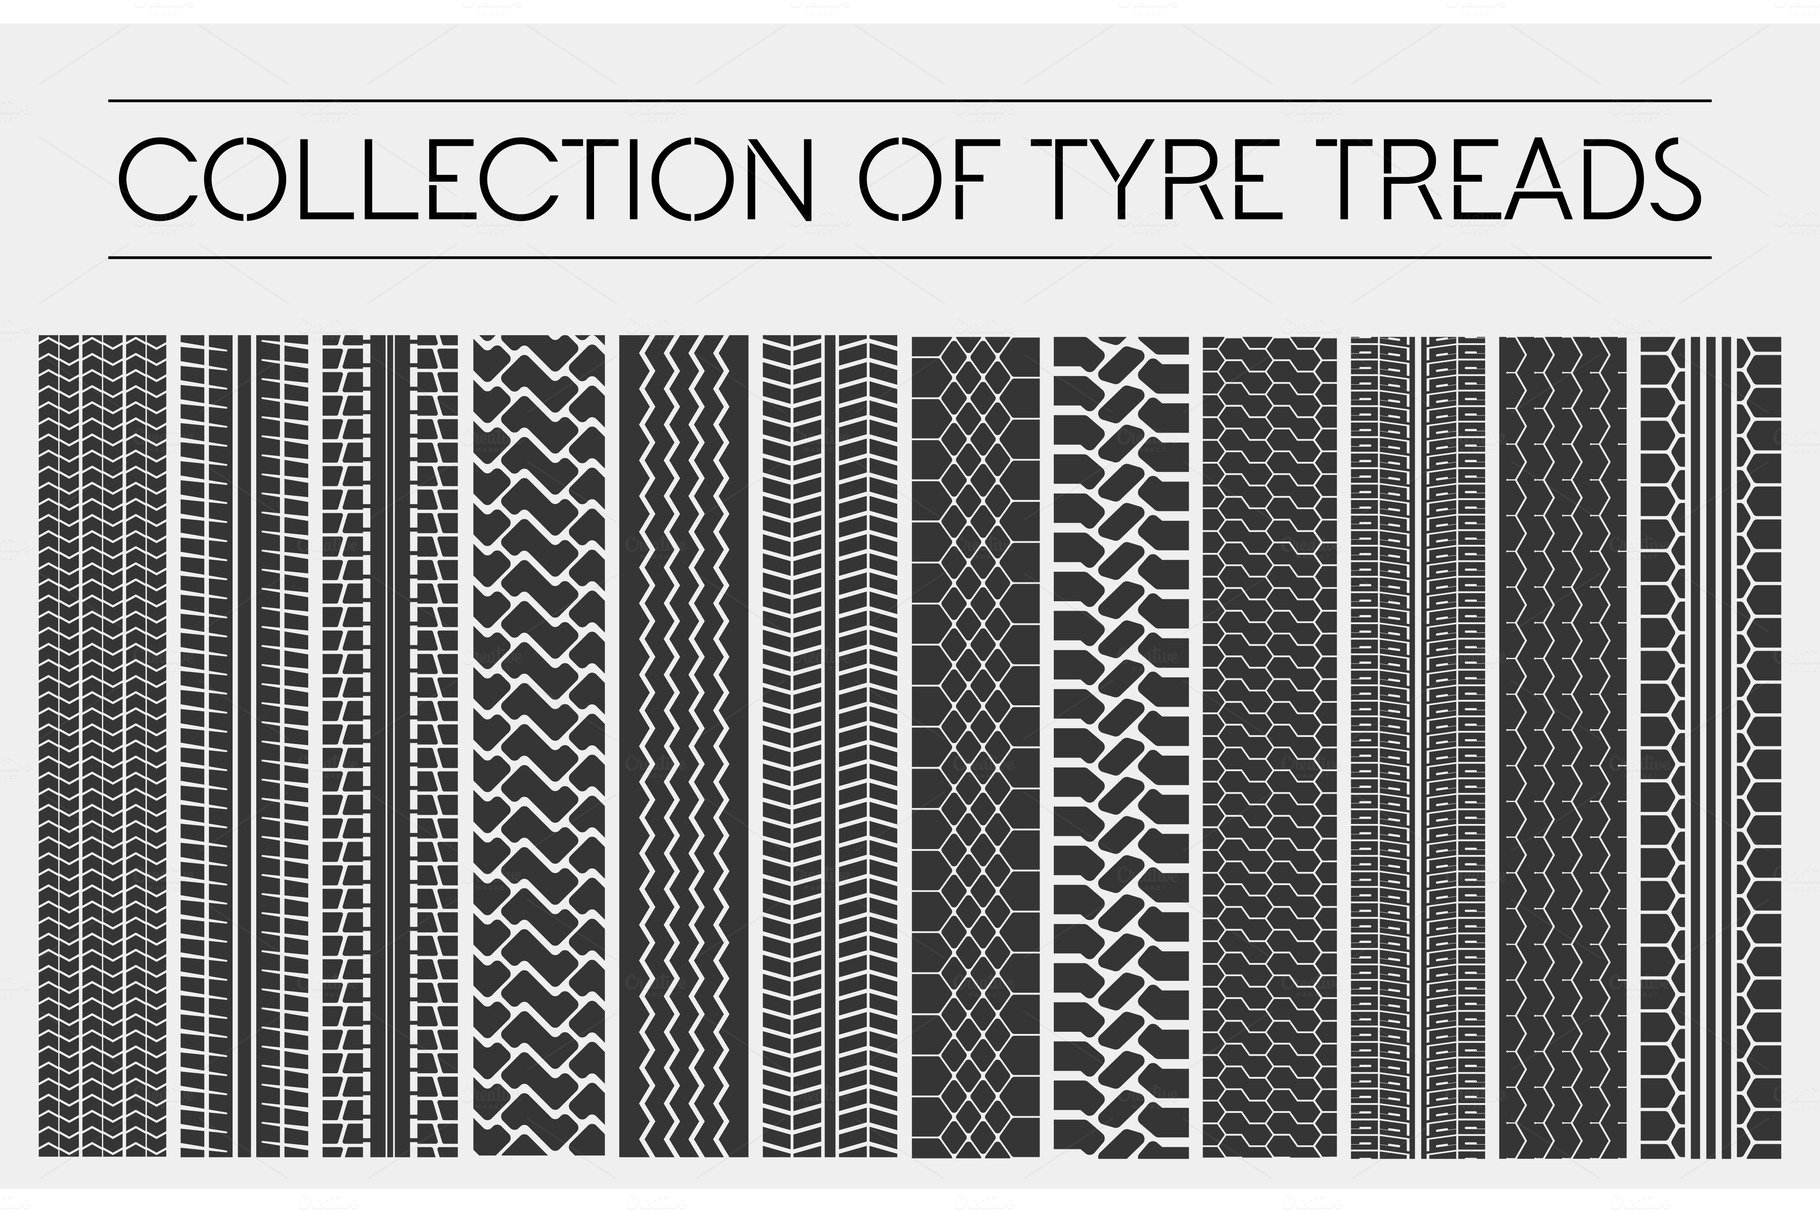 Wheel or tire, tyre treads or car tracks cover image.